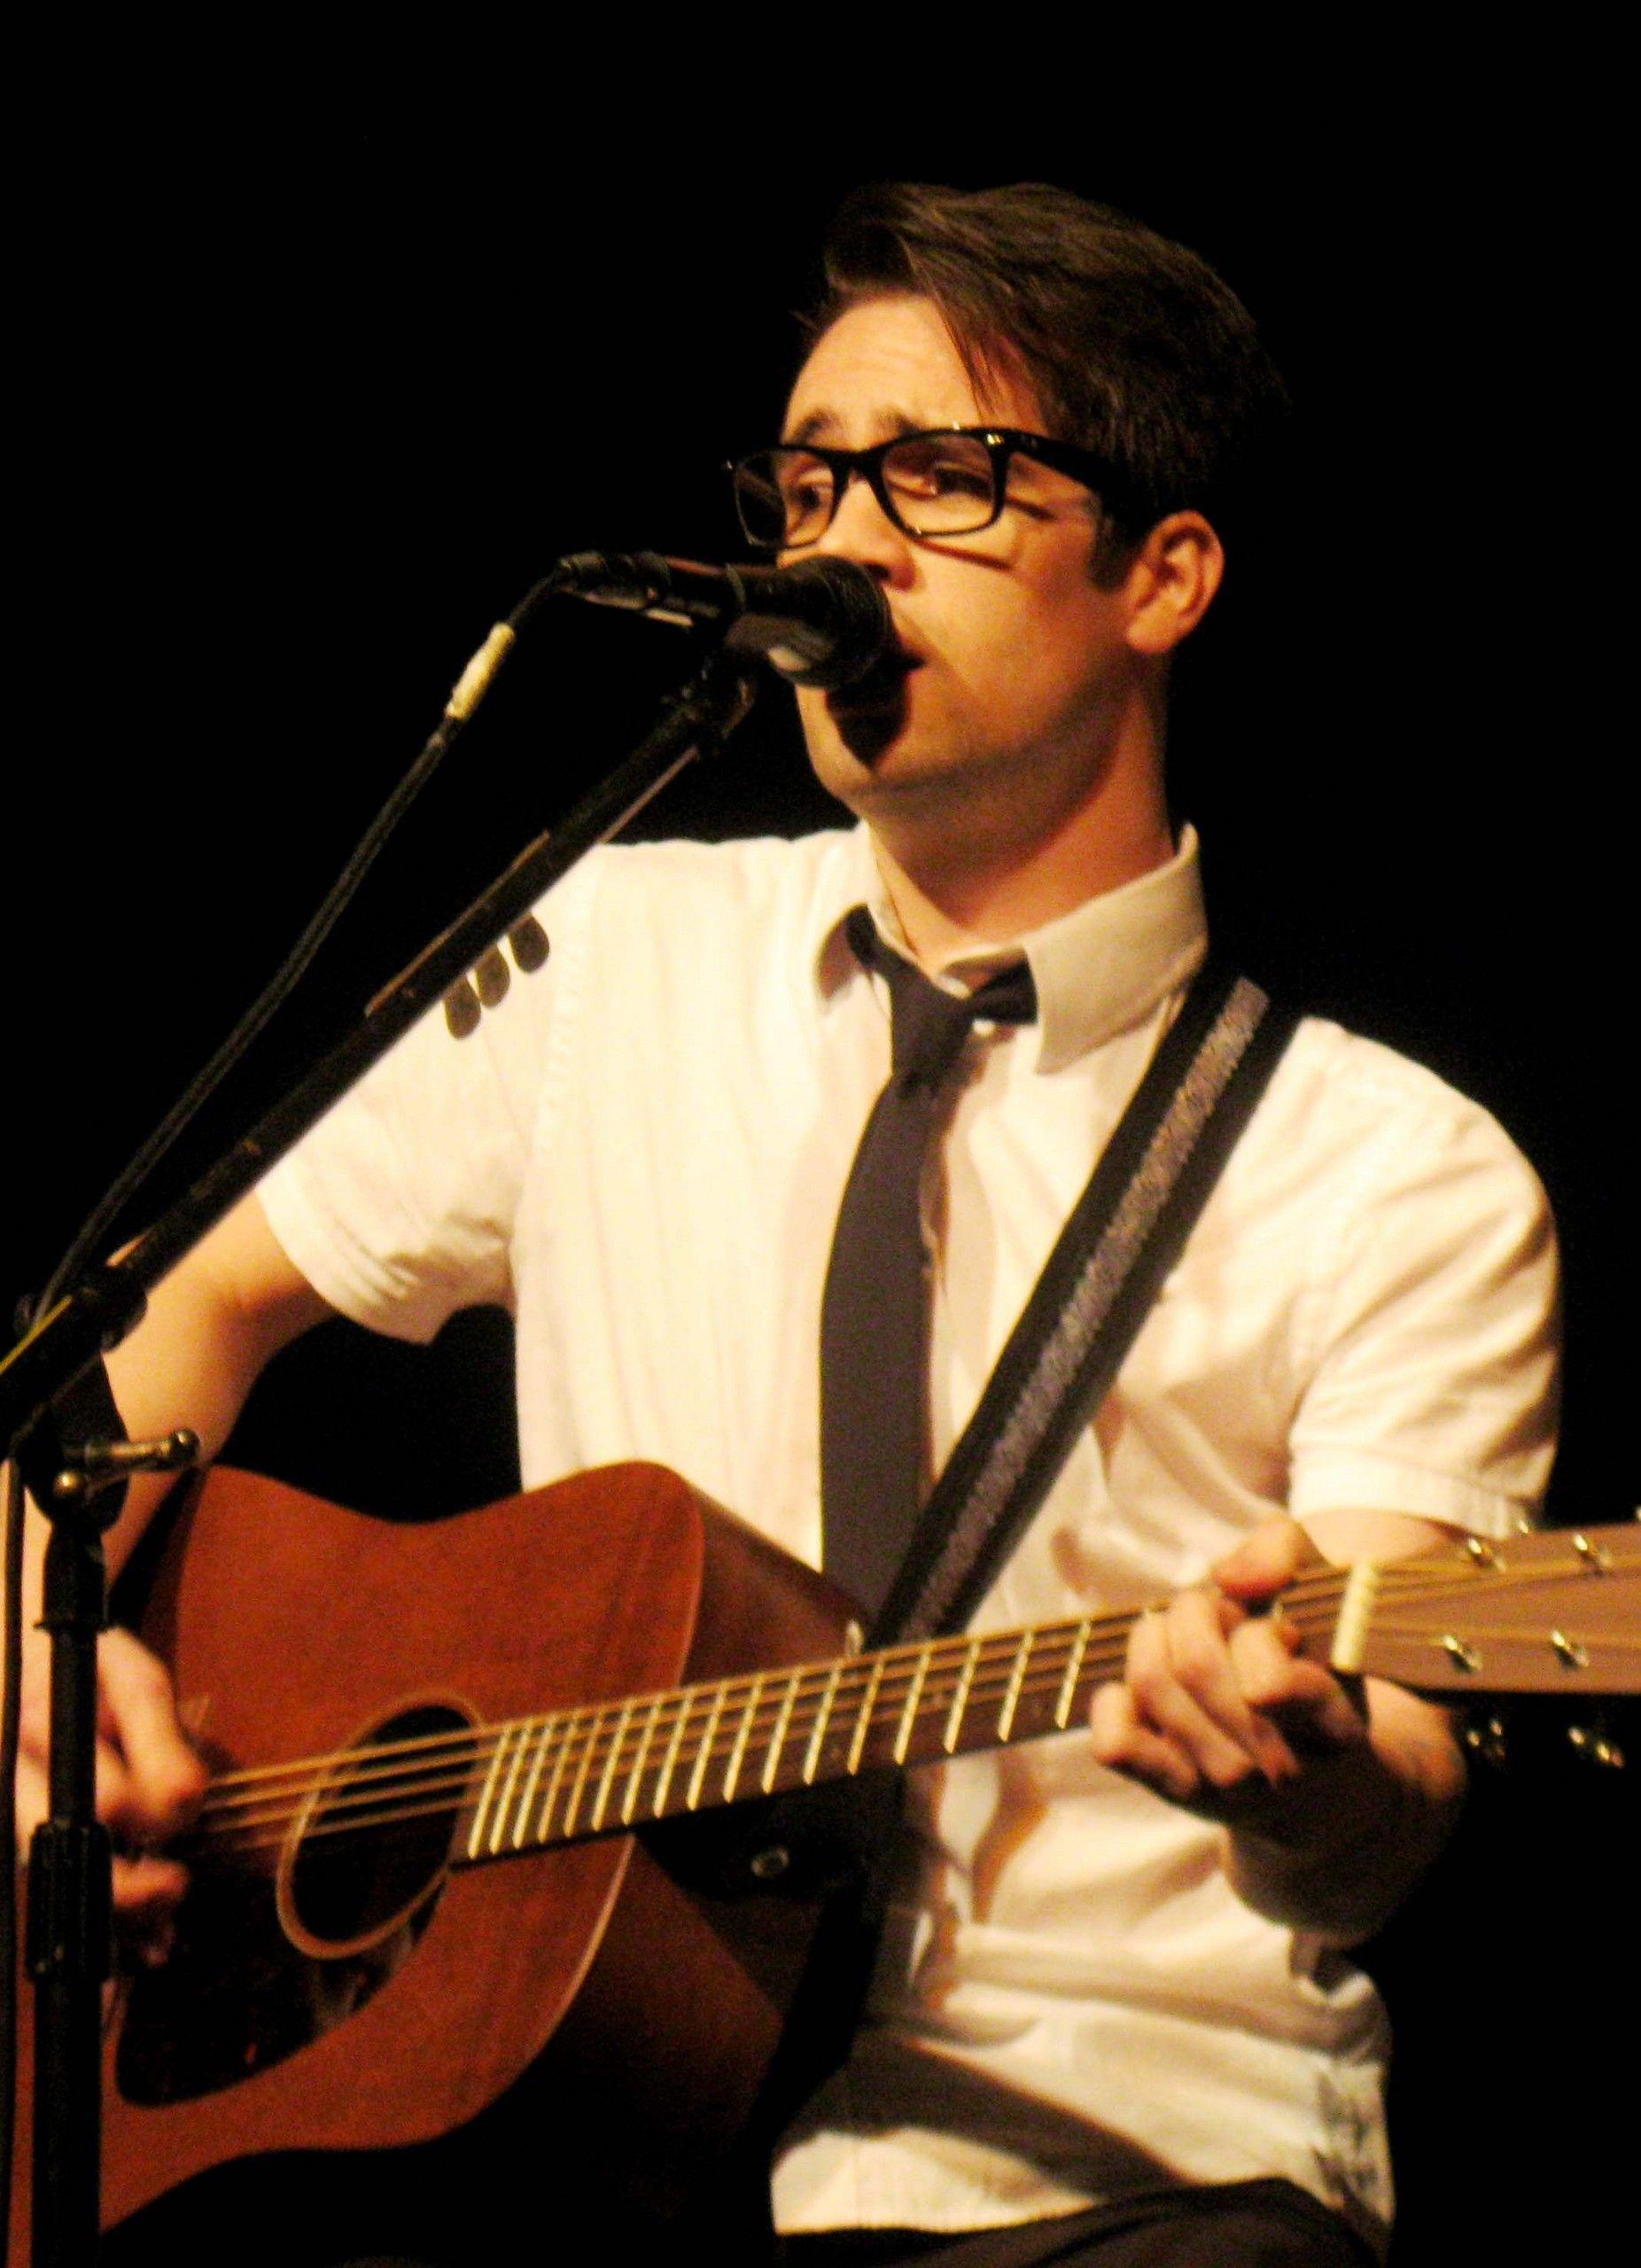 He's so adorable with his glasses on. Brendon Urie